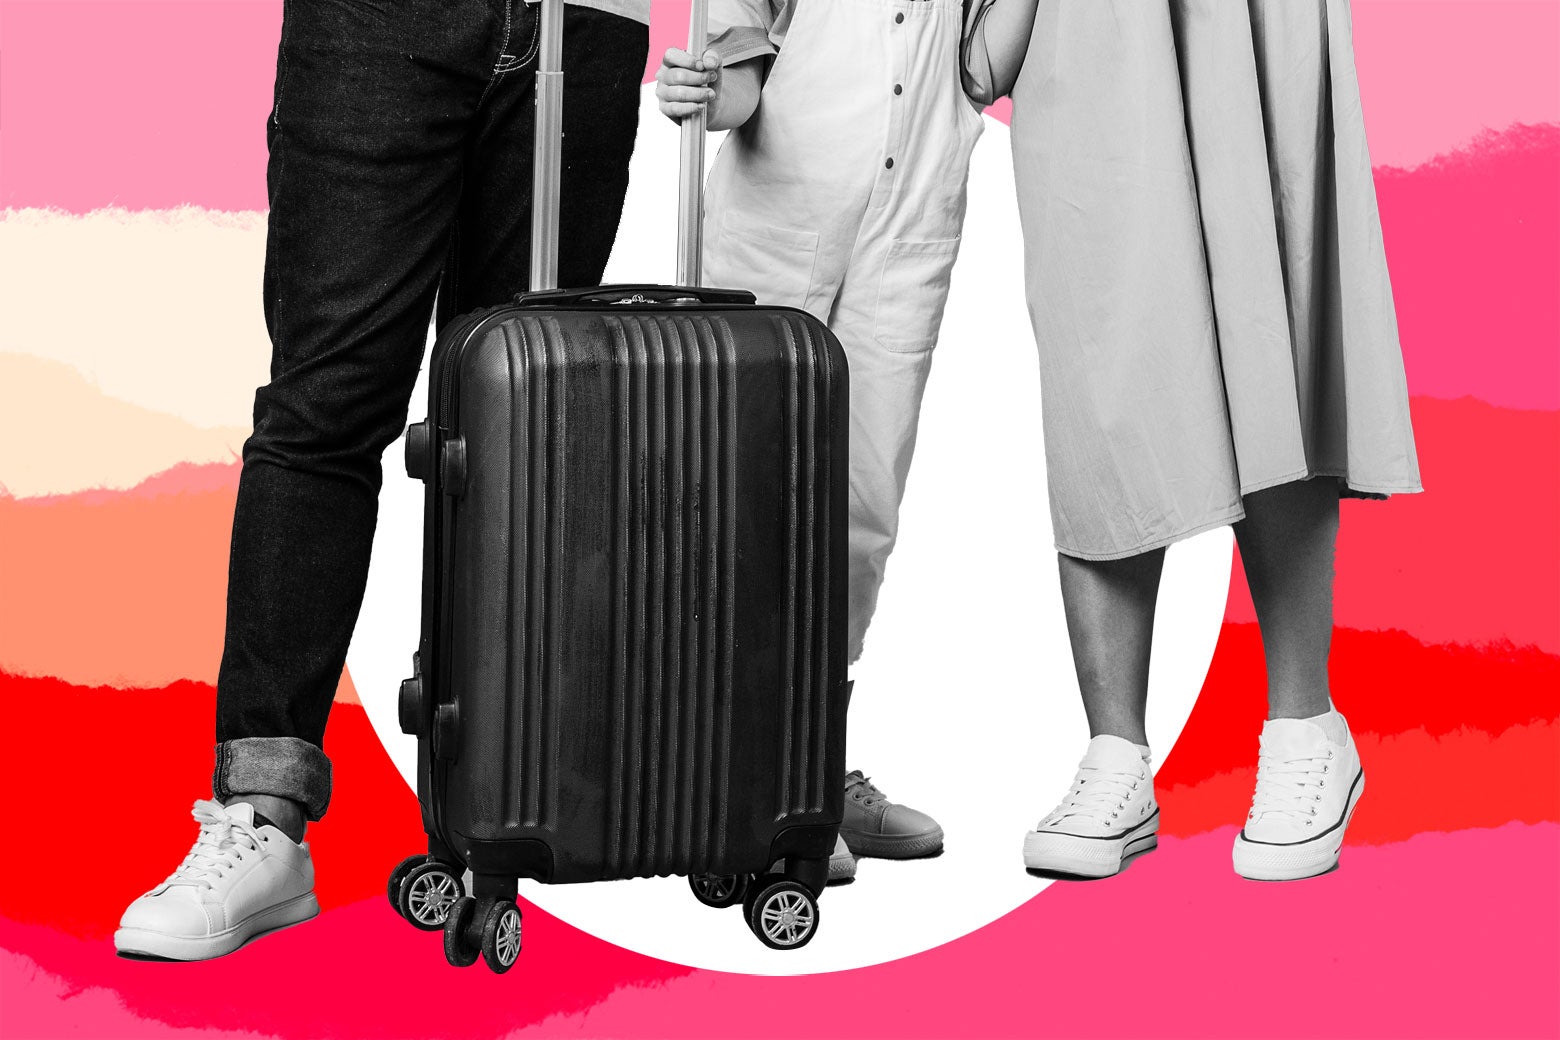 Three people stand next to a suitcase.